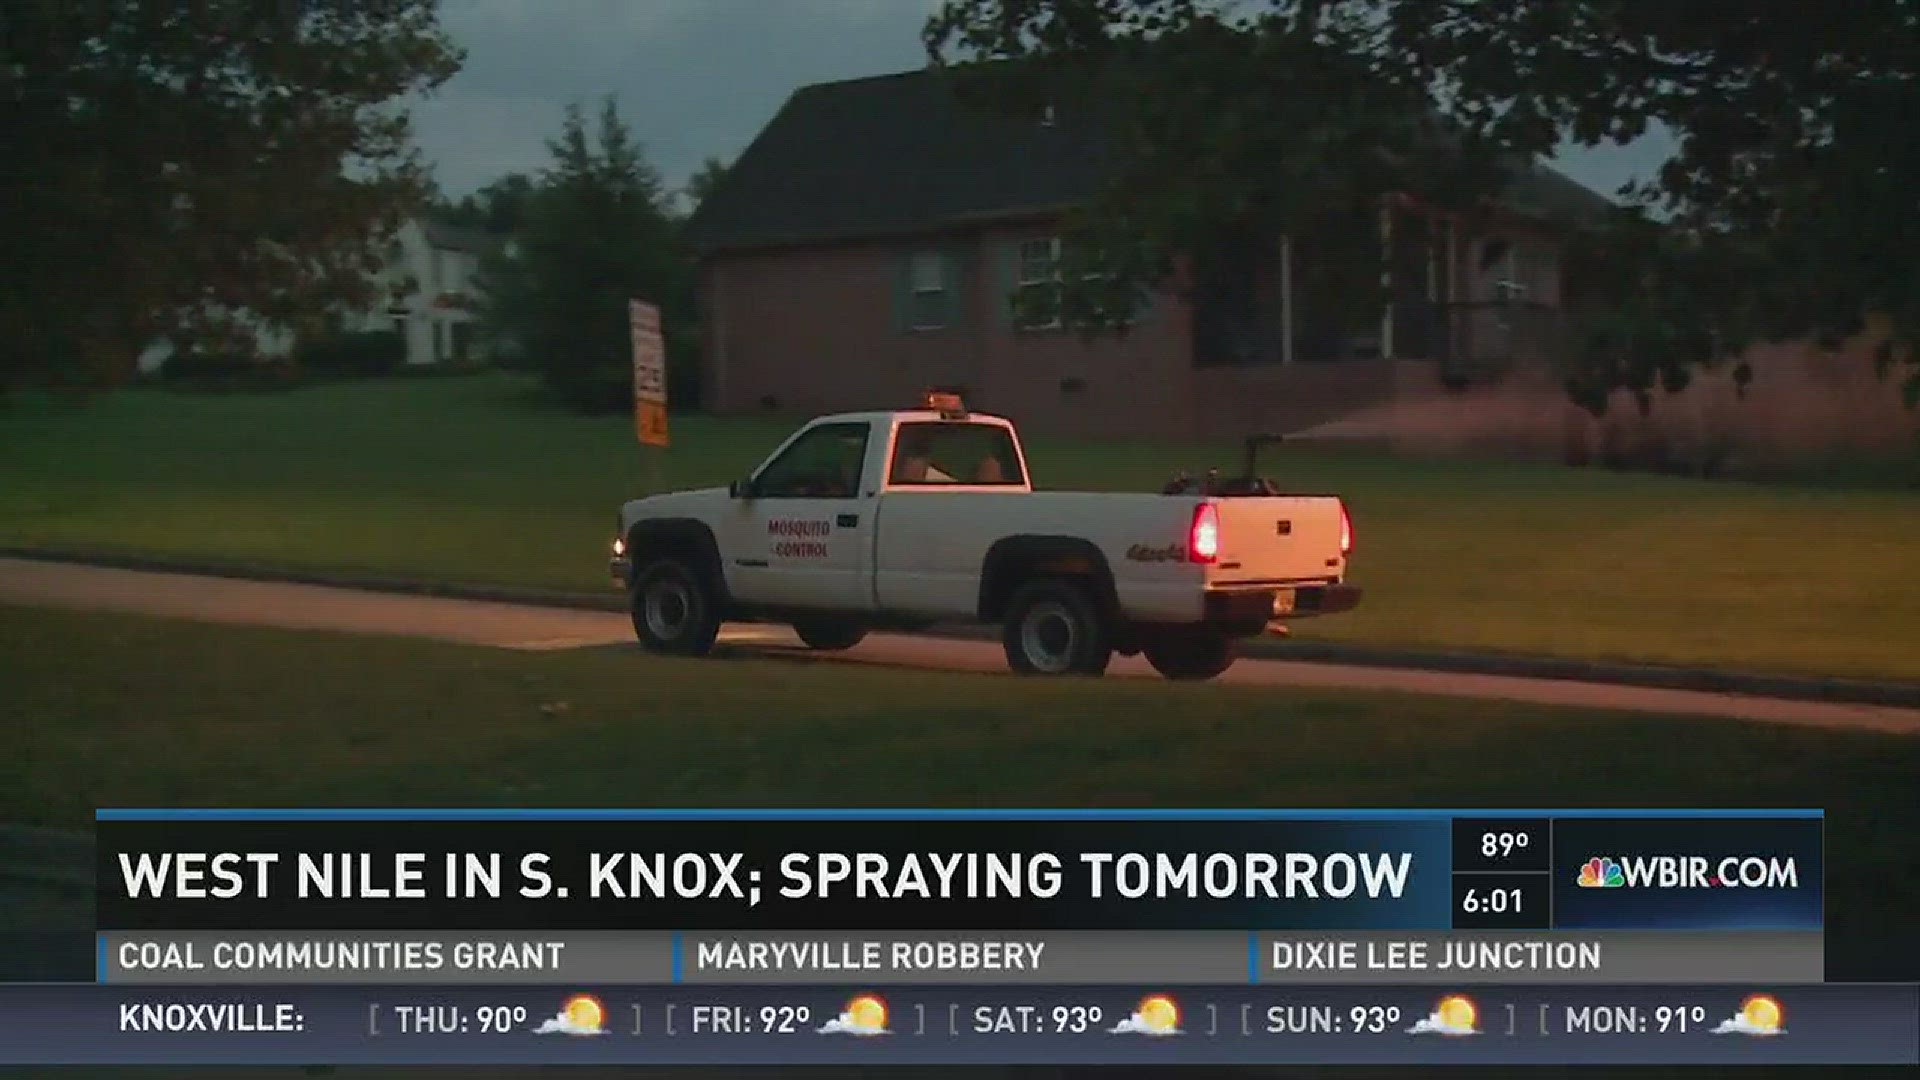 The Knox County Health Department will be spraying for mosquitoes in South Knox County after lab tests confirmed the presence of West Nile virus.